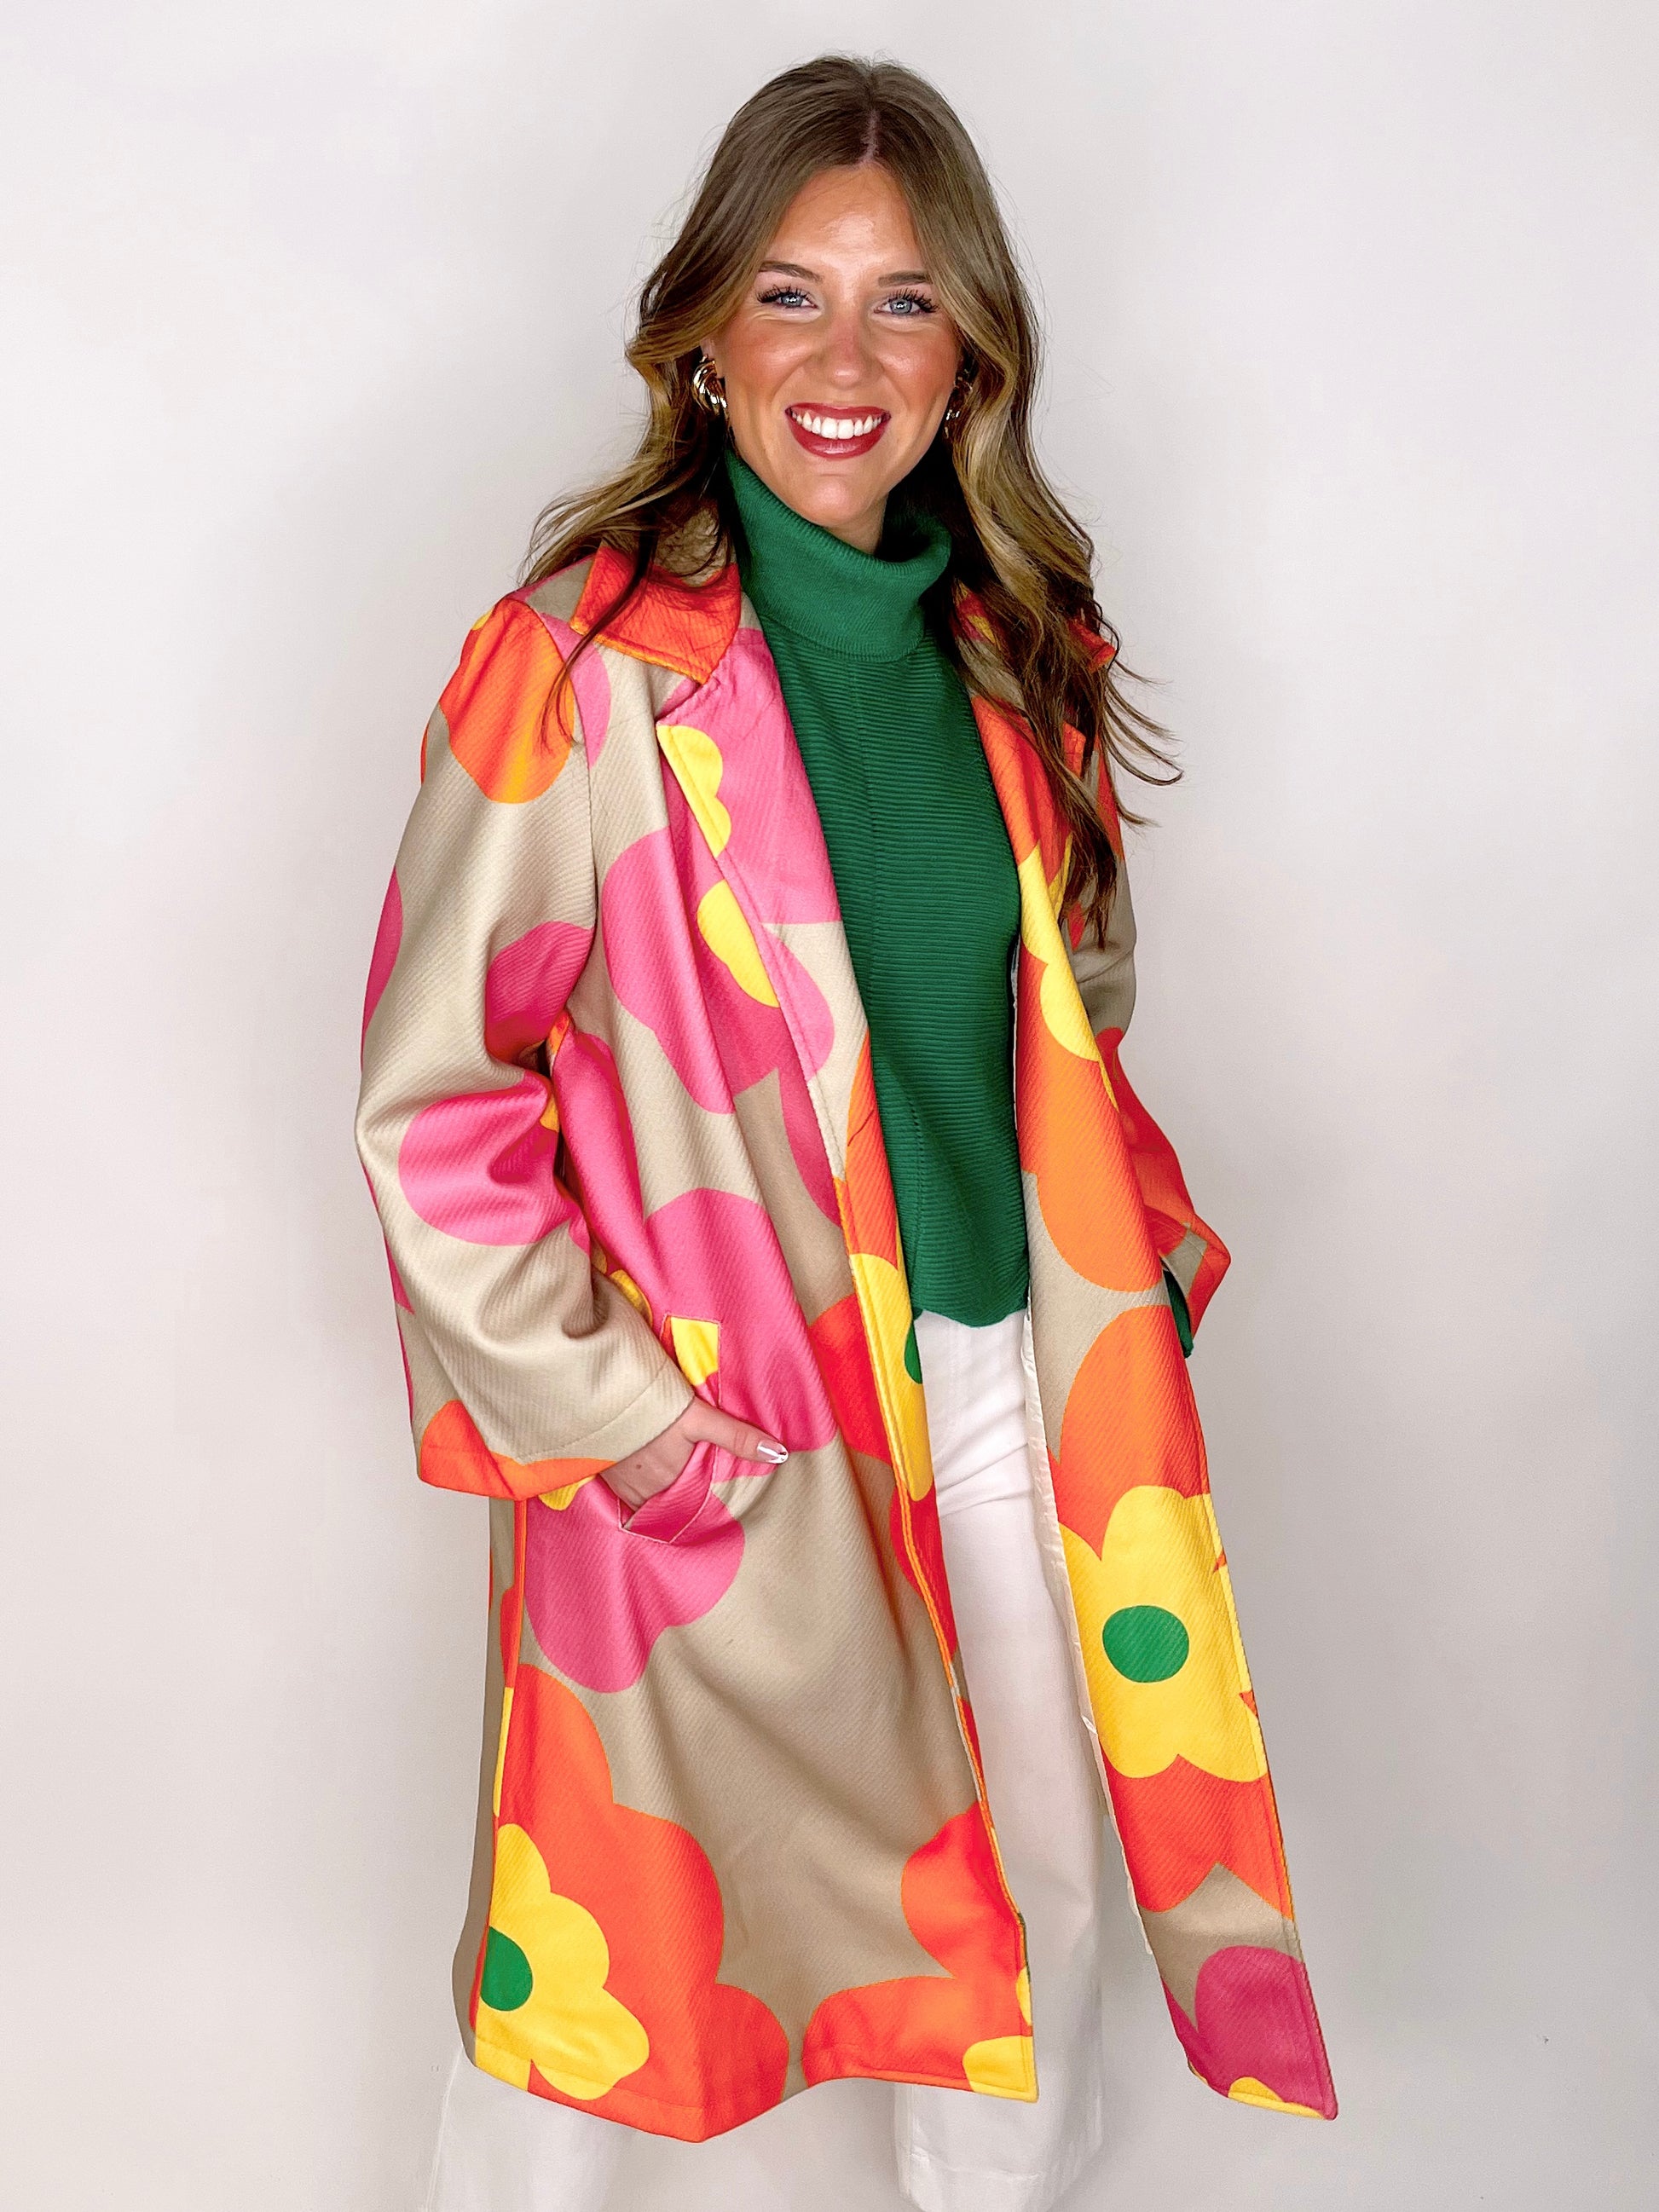 The Emily Overcoat-Coat-Davi & Dani-The Village Shoppe, Women’s Fashion Boutique, Shop Online and In Store - Located in Muscle Shoals, AL.